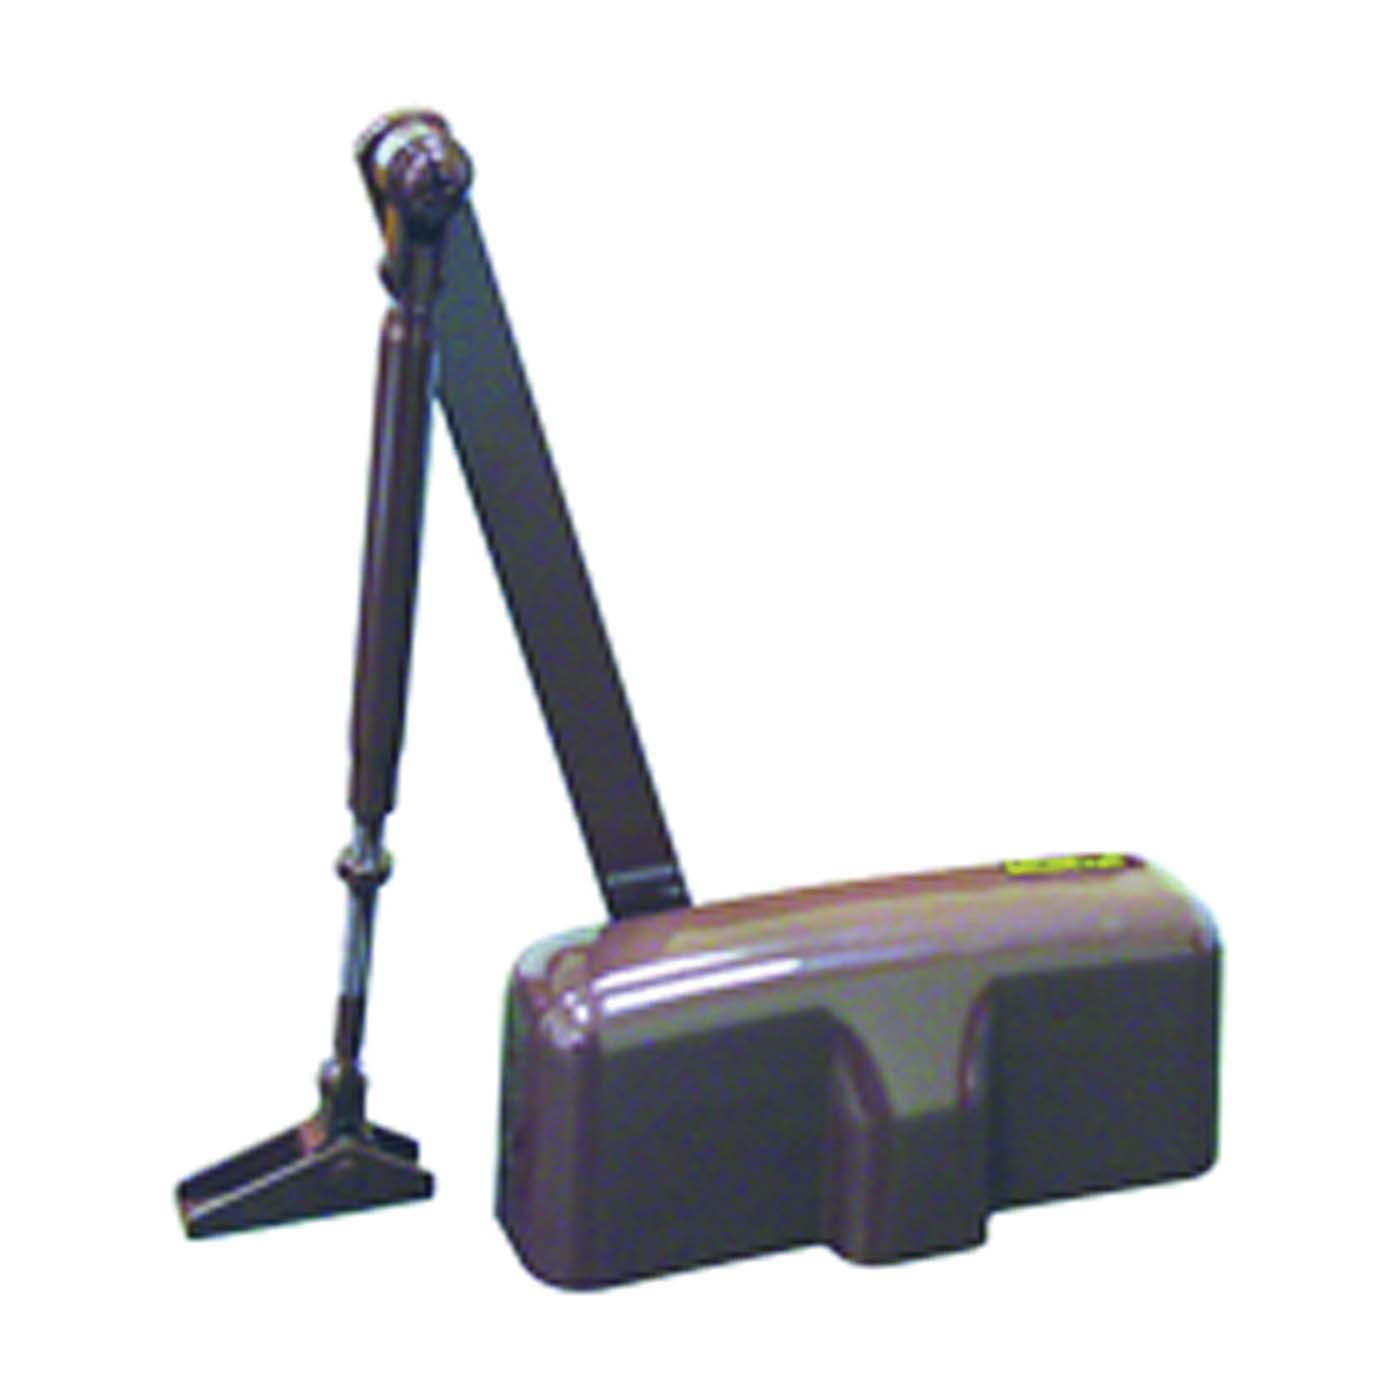 C102-BH-SA-BR Door Closer, Automatic, Aluminum, Brown, 100 lb, 150 x 19 mm Mounting Hole Distance